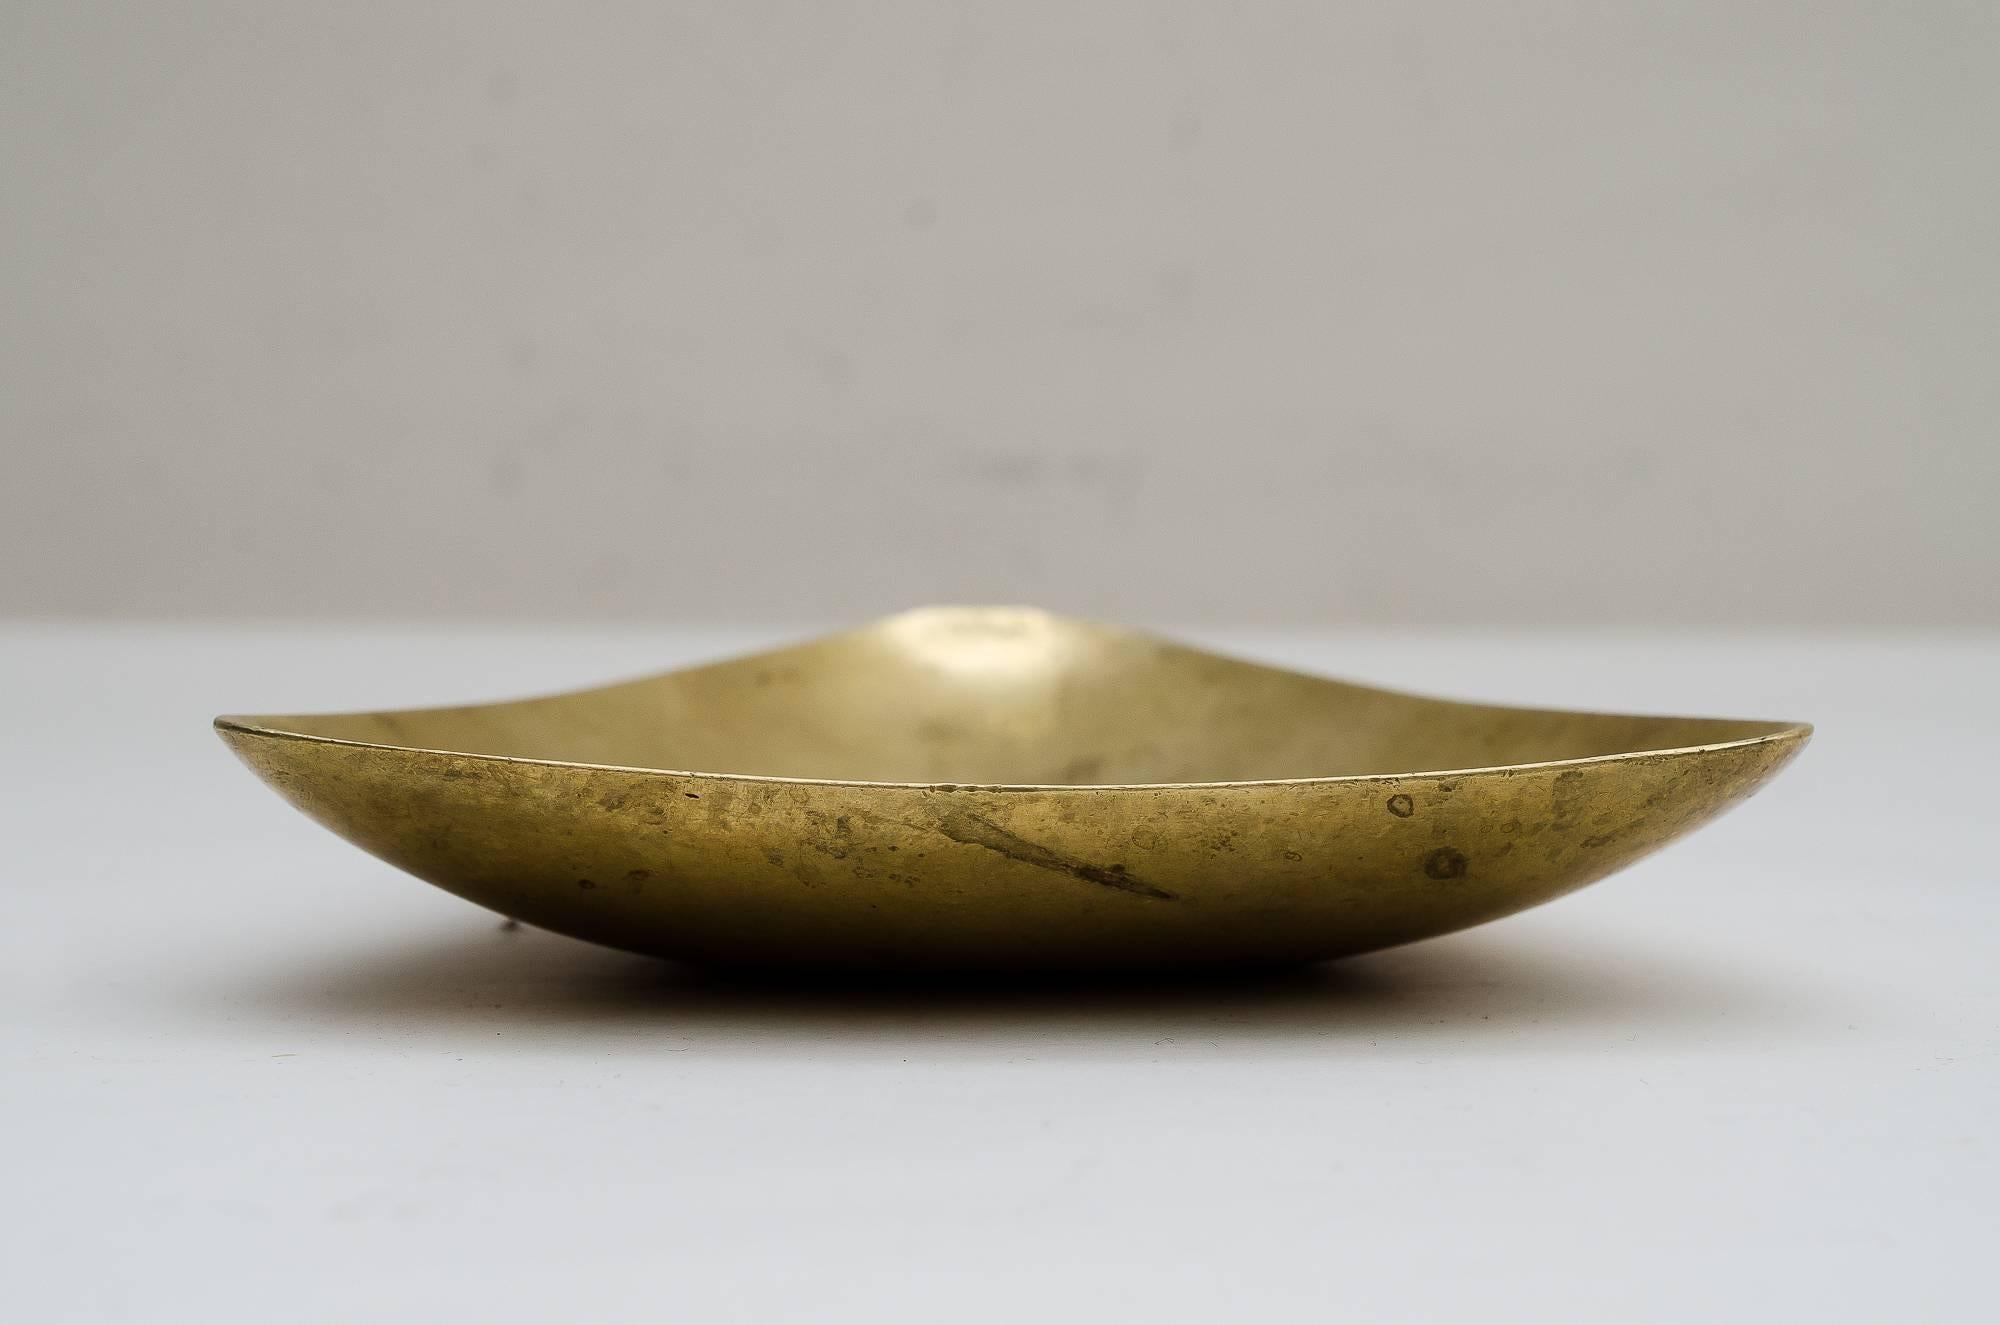 Small bowl by Carl Auböck (signatured)
Original condition.
 